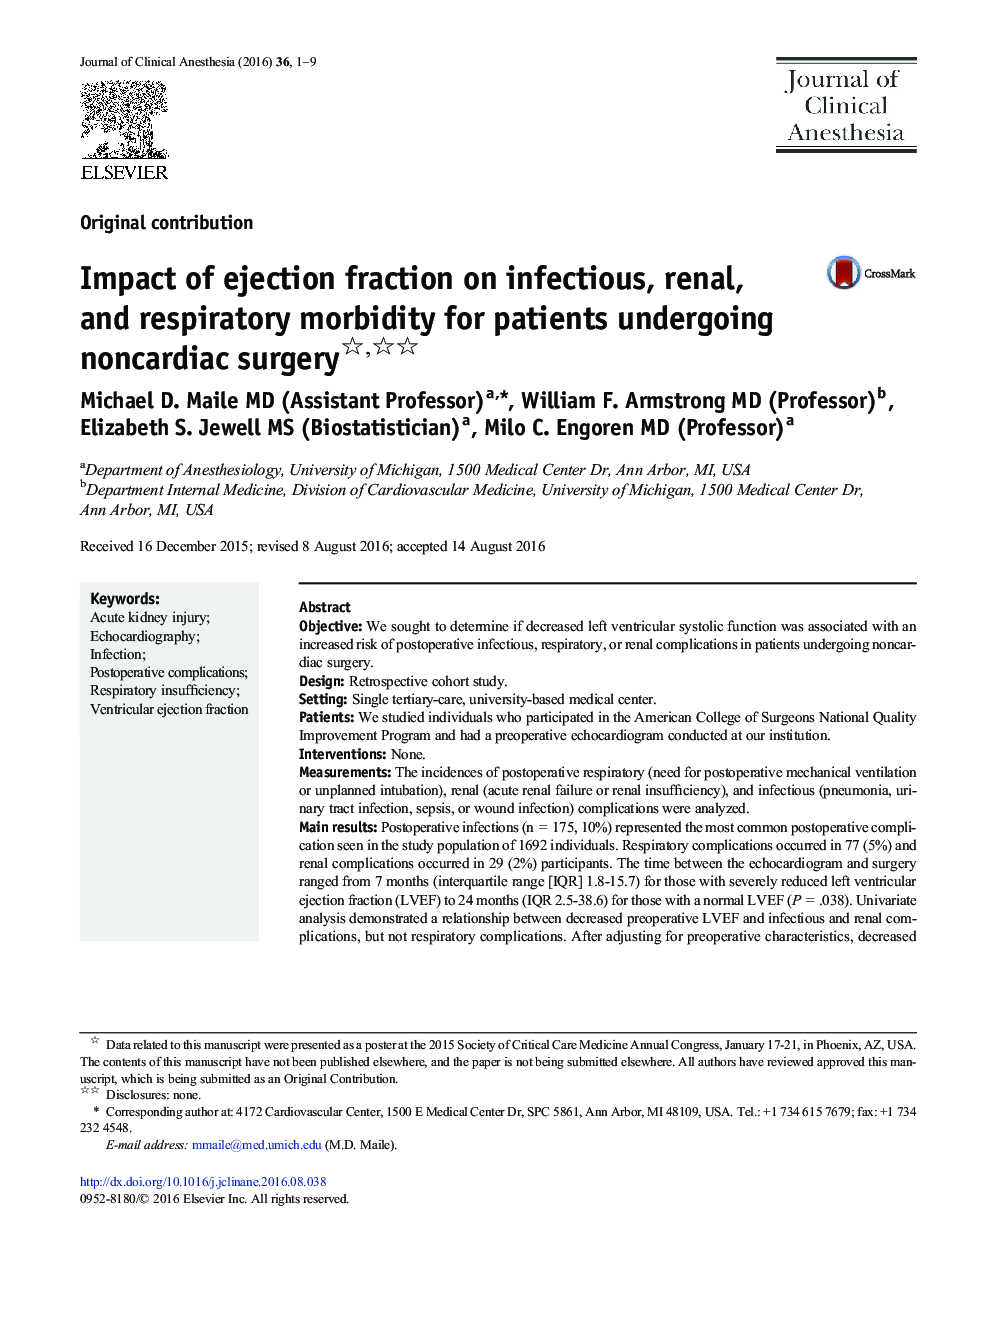 Impact of ejection fraction on infectious, renal, and respiratory morbidity for patients undergoing noncardiac surgery